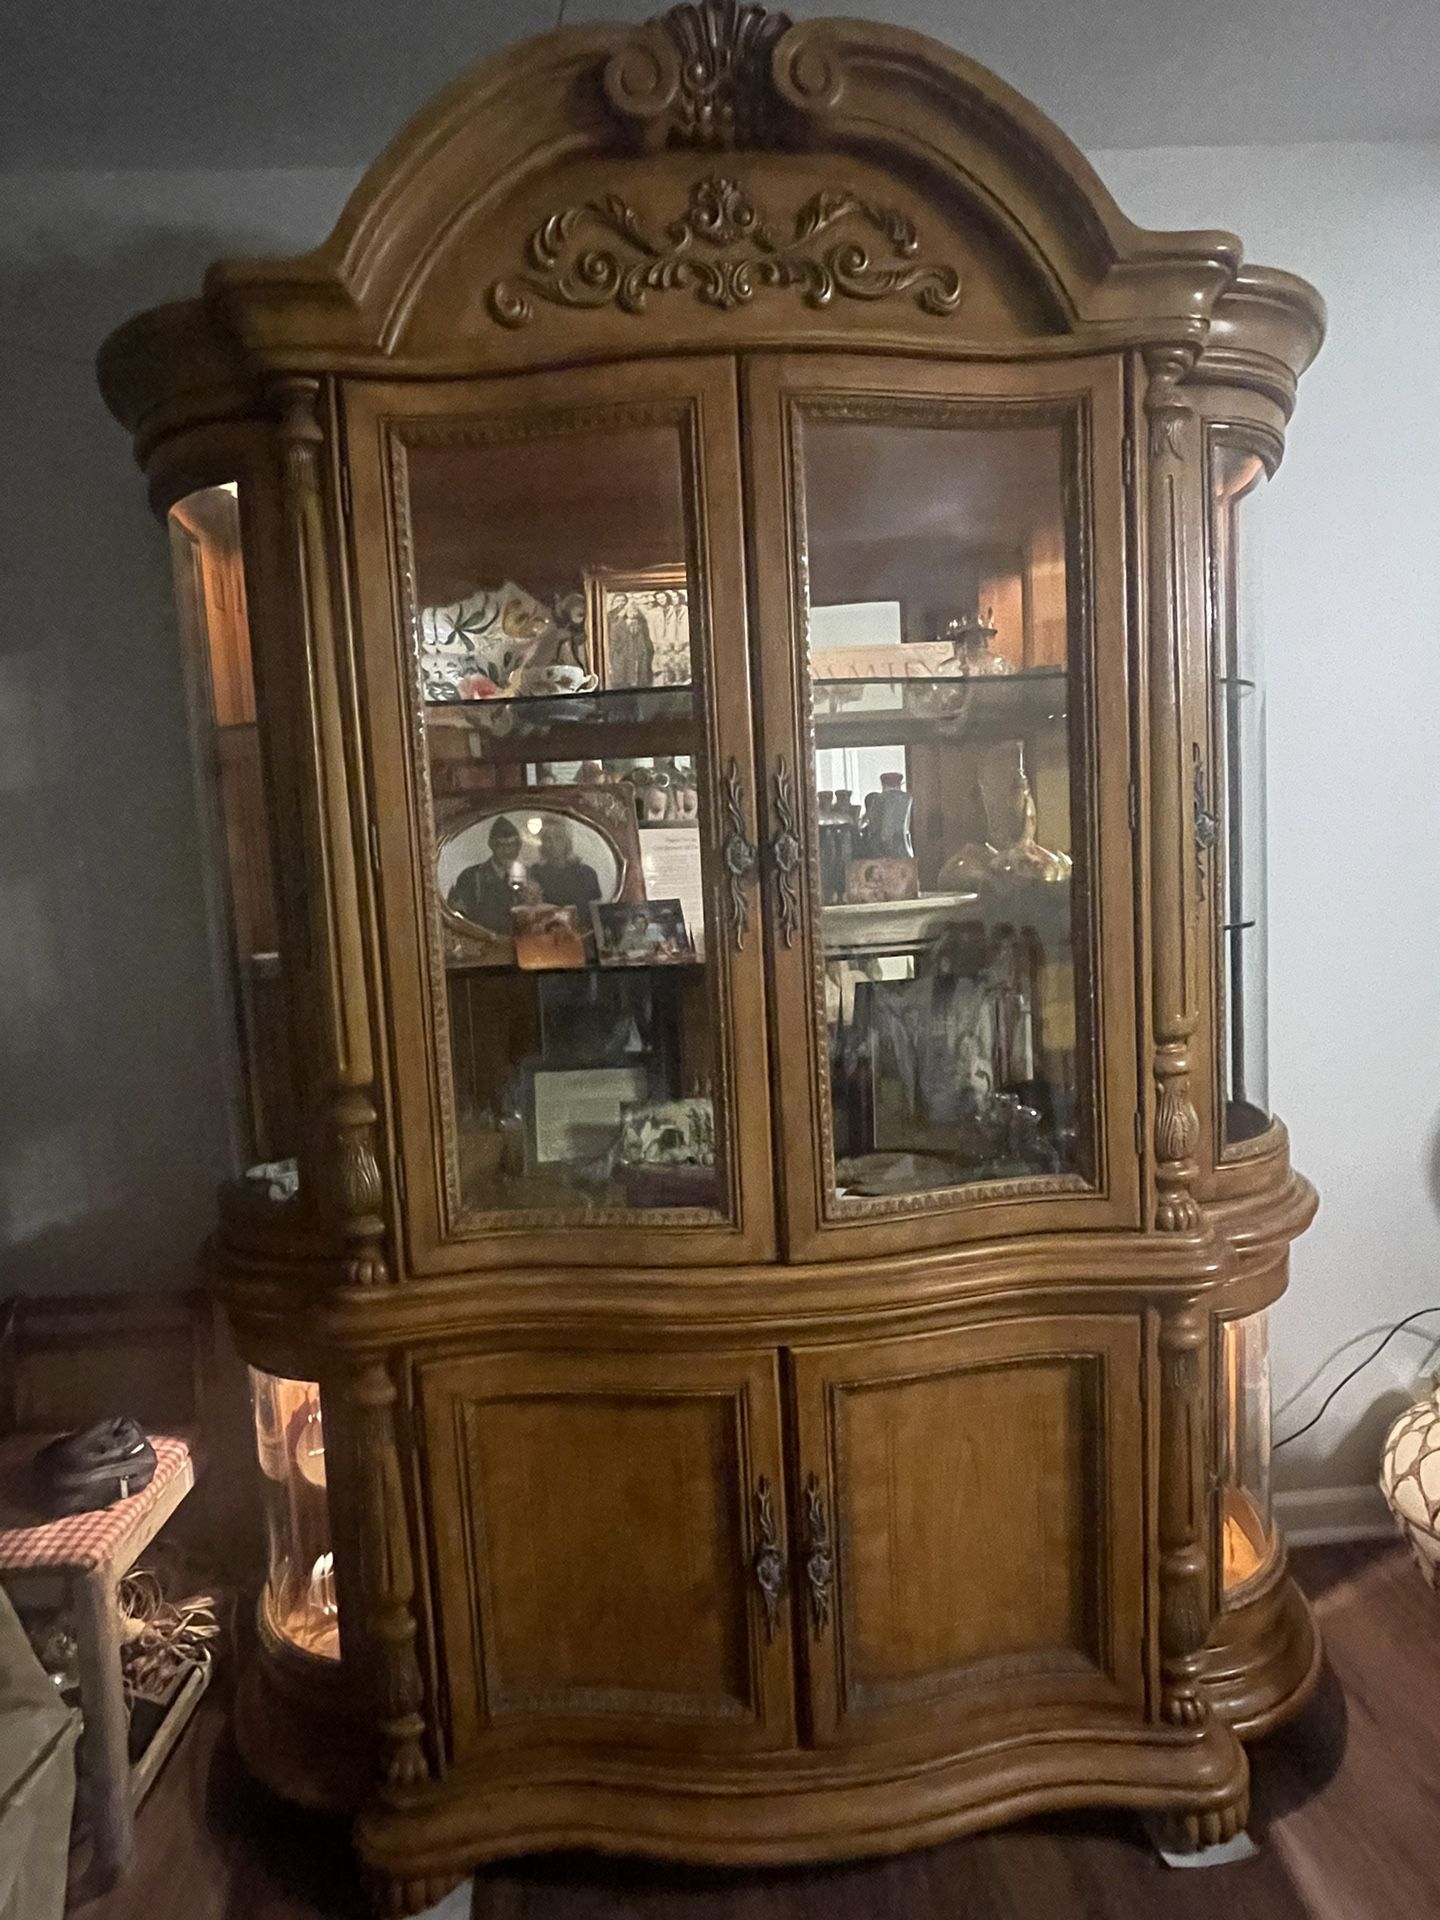 Beautiful Two Piece Solid Wood China Cabinet / Armoire & matching dining table with six chairs and leaf extender